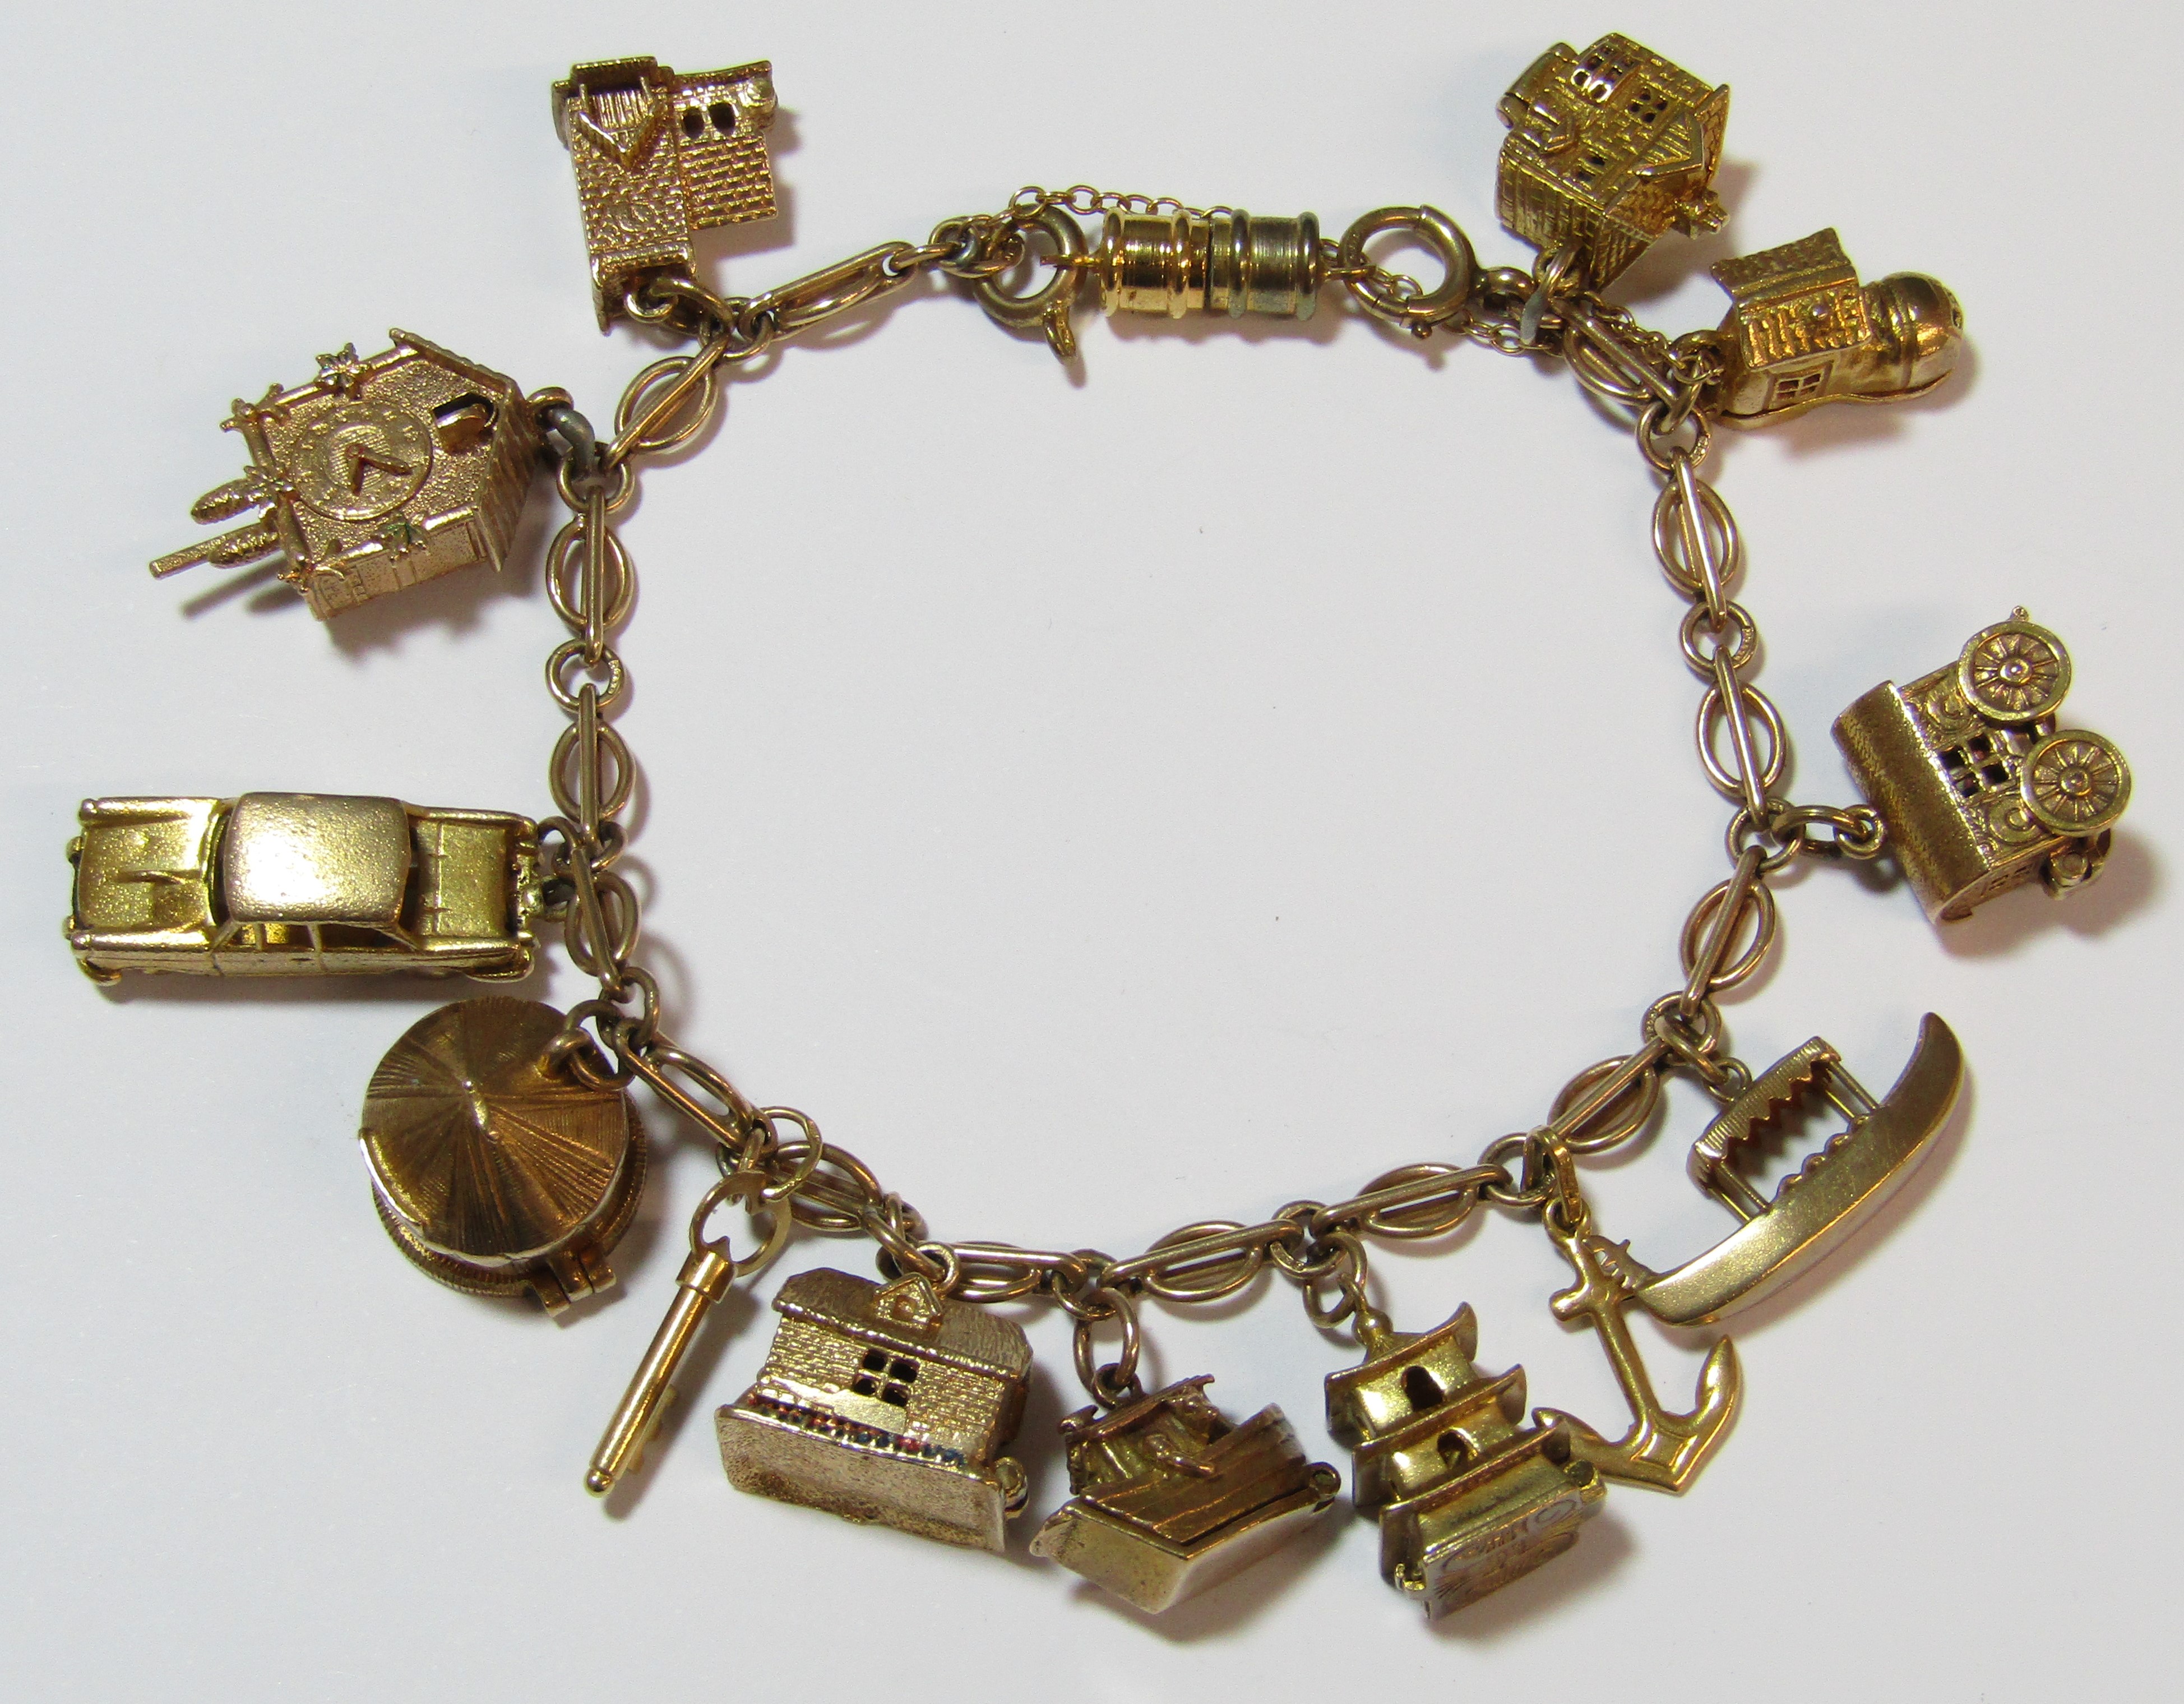 9ct gold charm bracelet - all charms appear hallmarked apart from 'Old Mother Hubbards Boot',